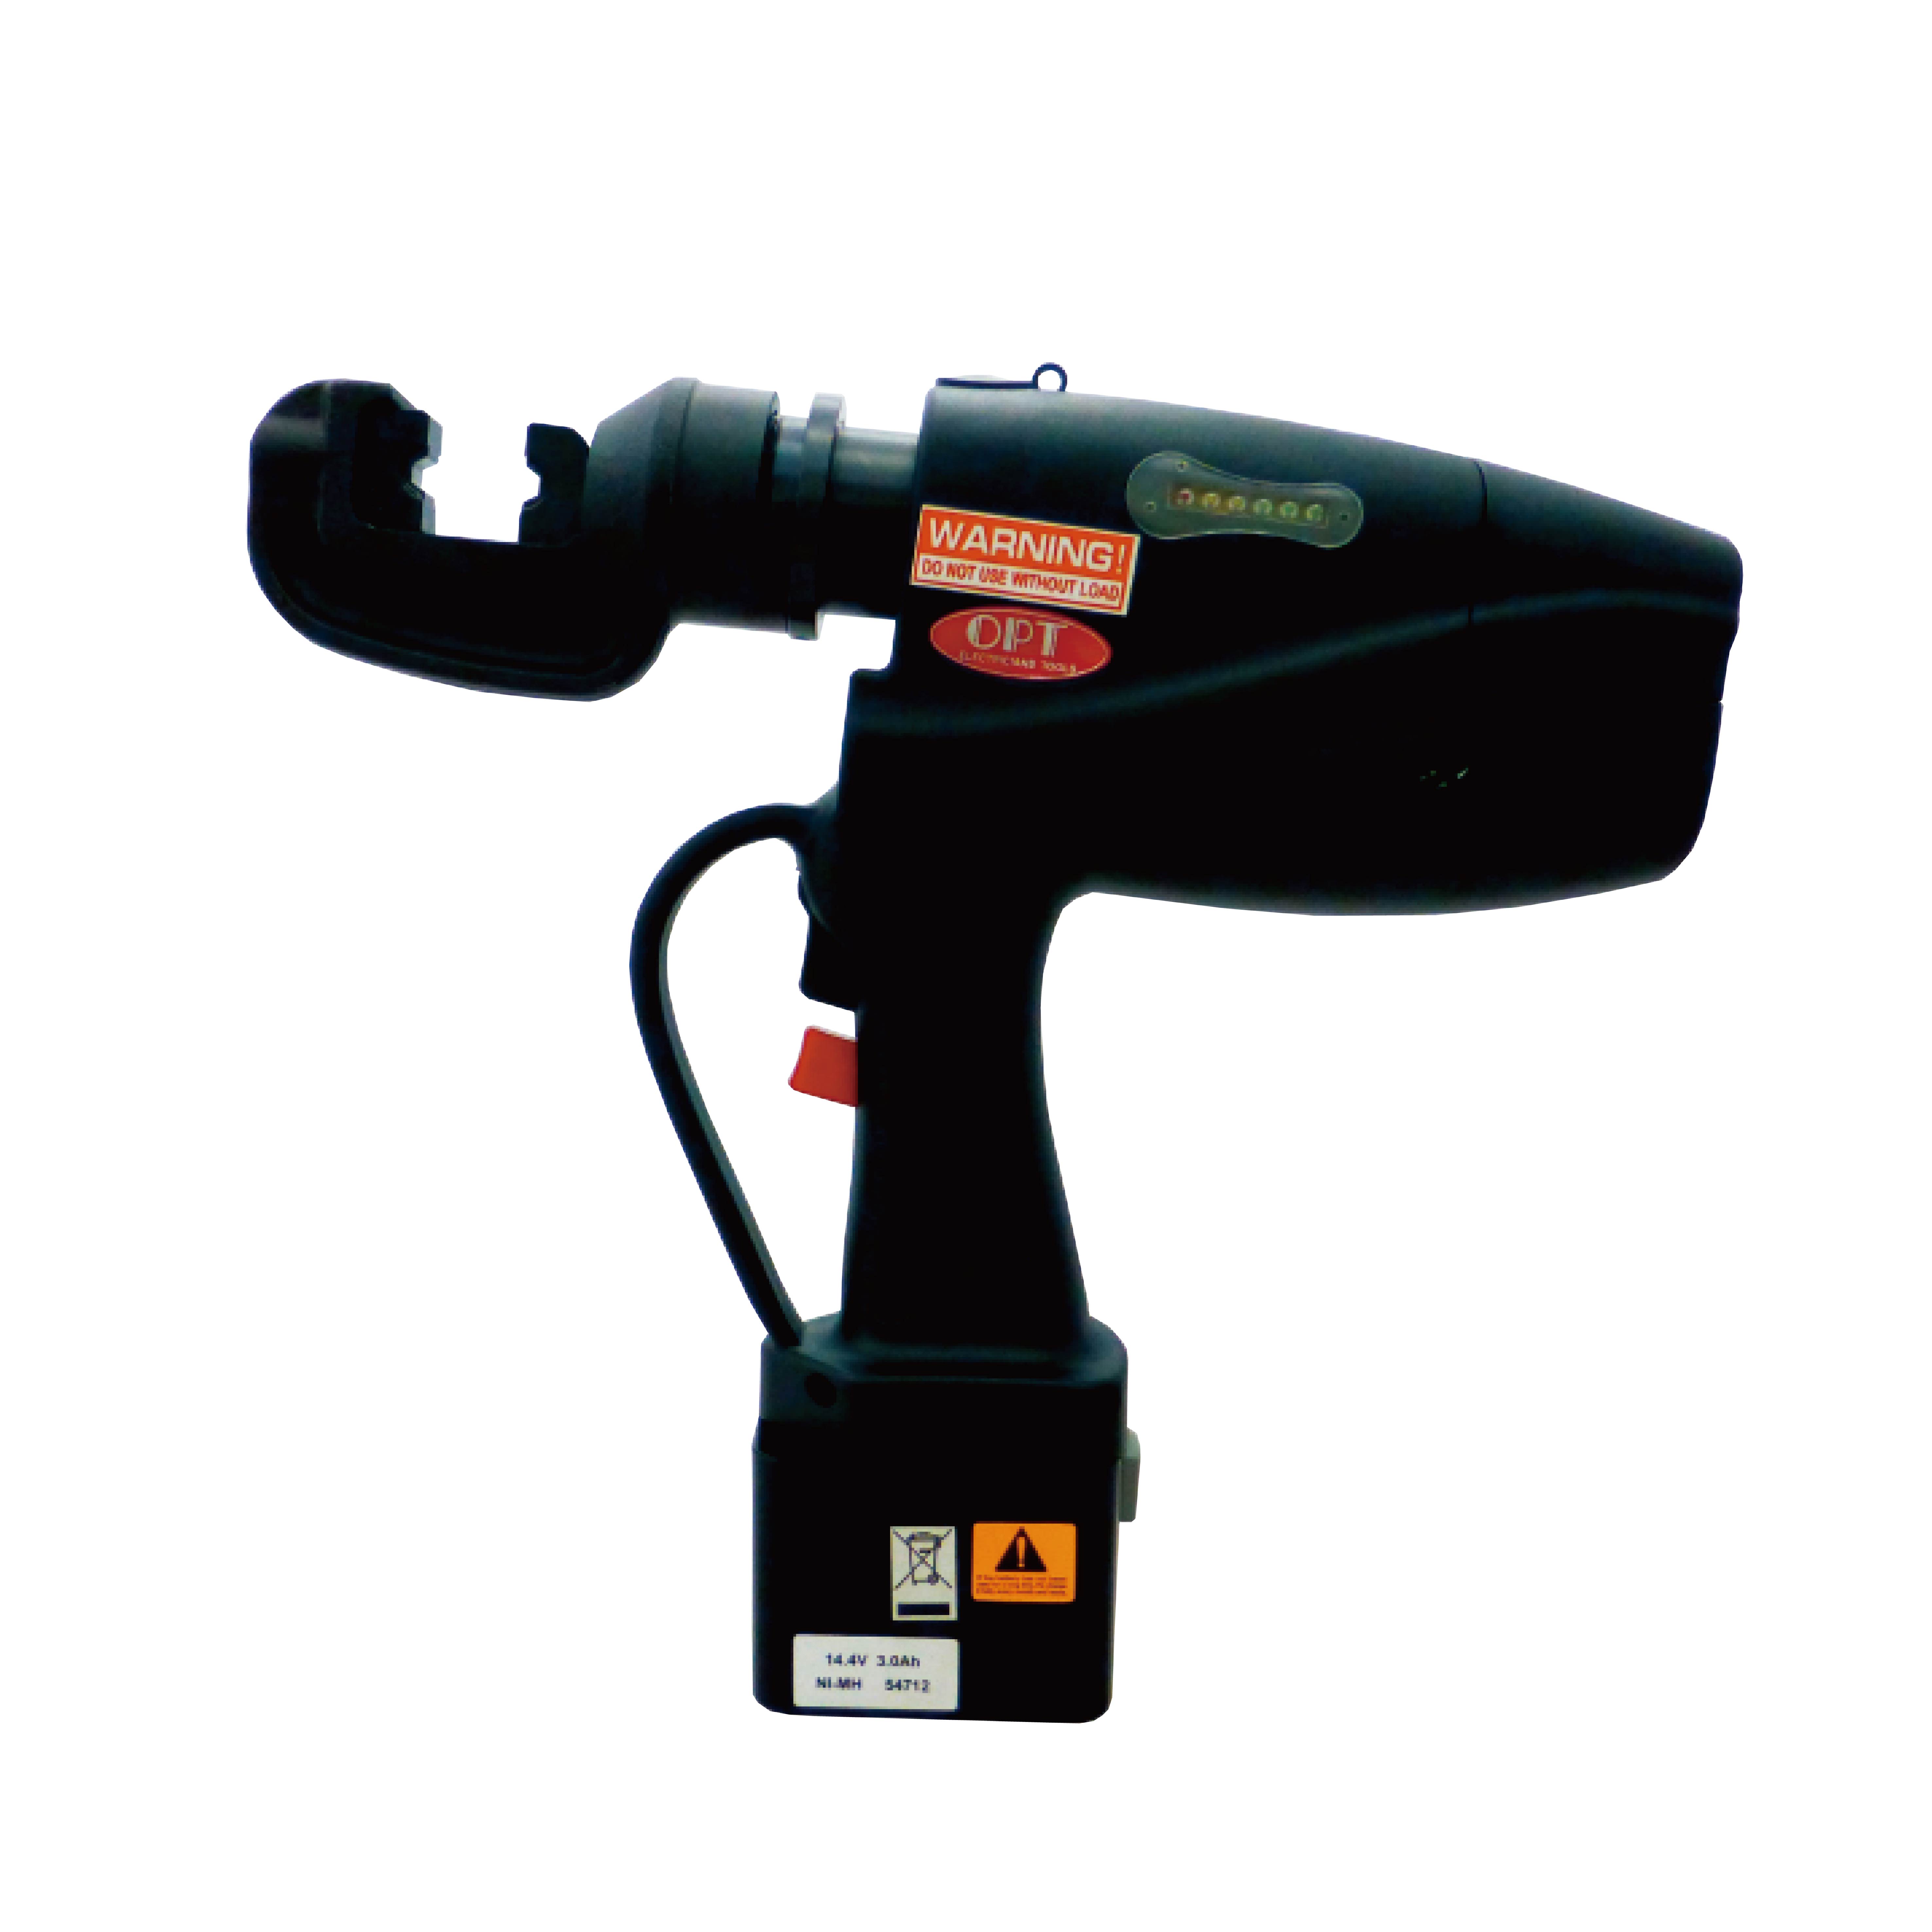 EPL-150D CORDLESS HYDRAULIC CRIMPING TOOLS-EPL-58